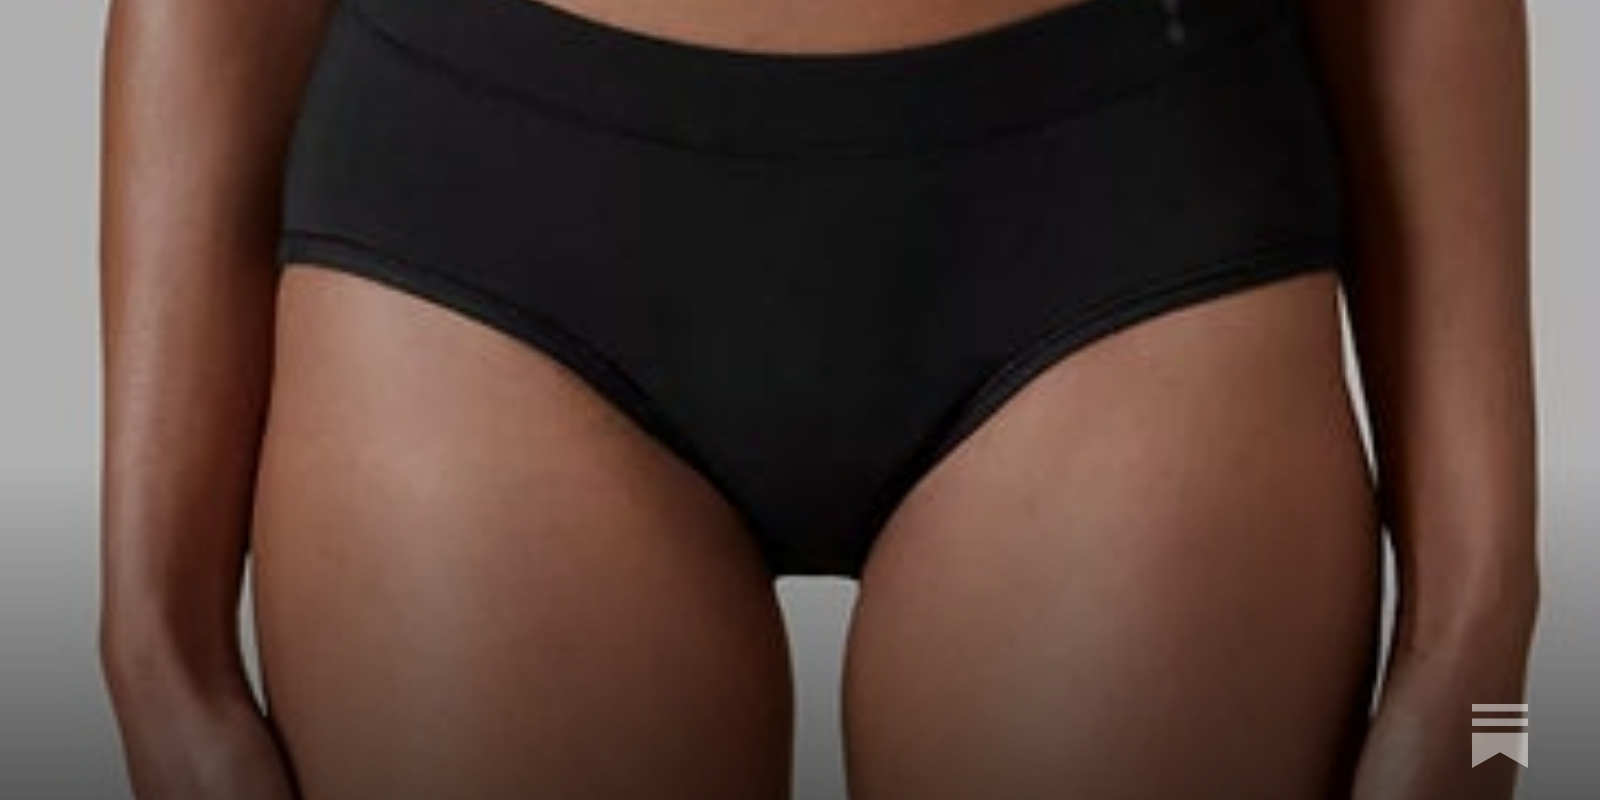 I'm a Medical Toxicologist, and Here's What I Think About Whether the  Chemicals Found in Period Underwear Are Safe or Not